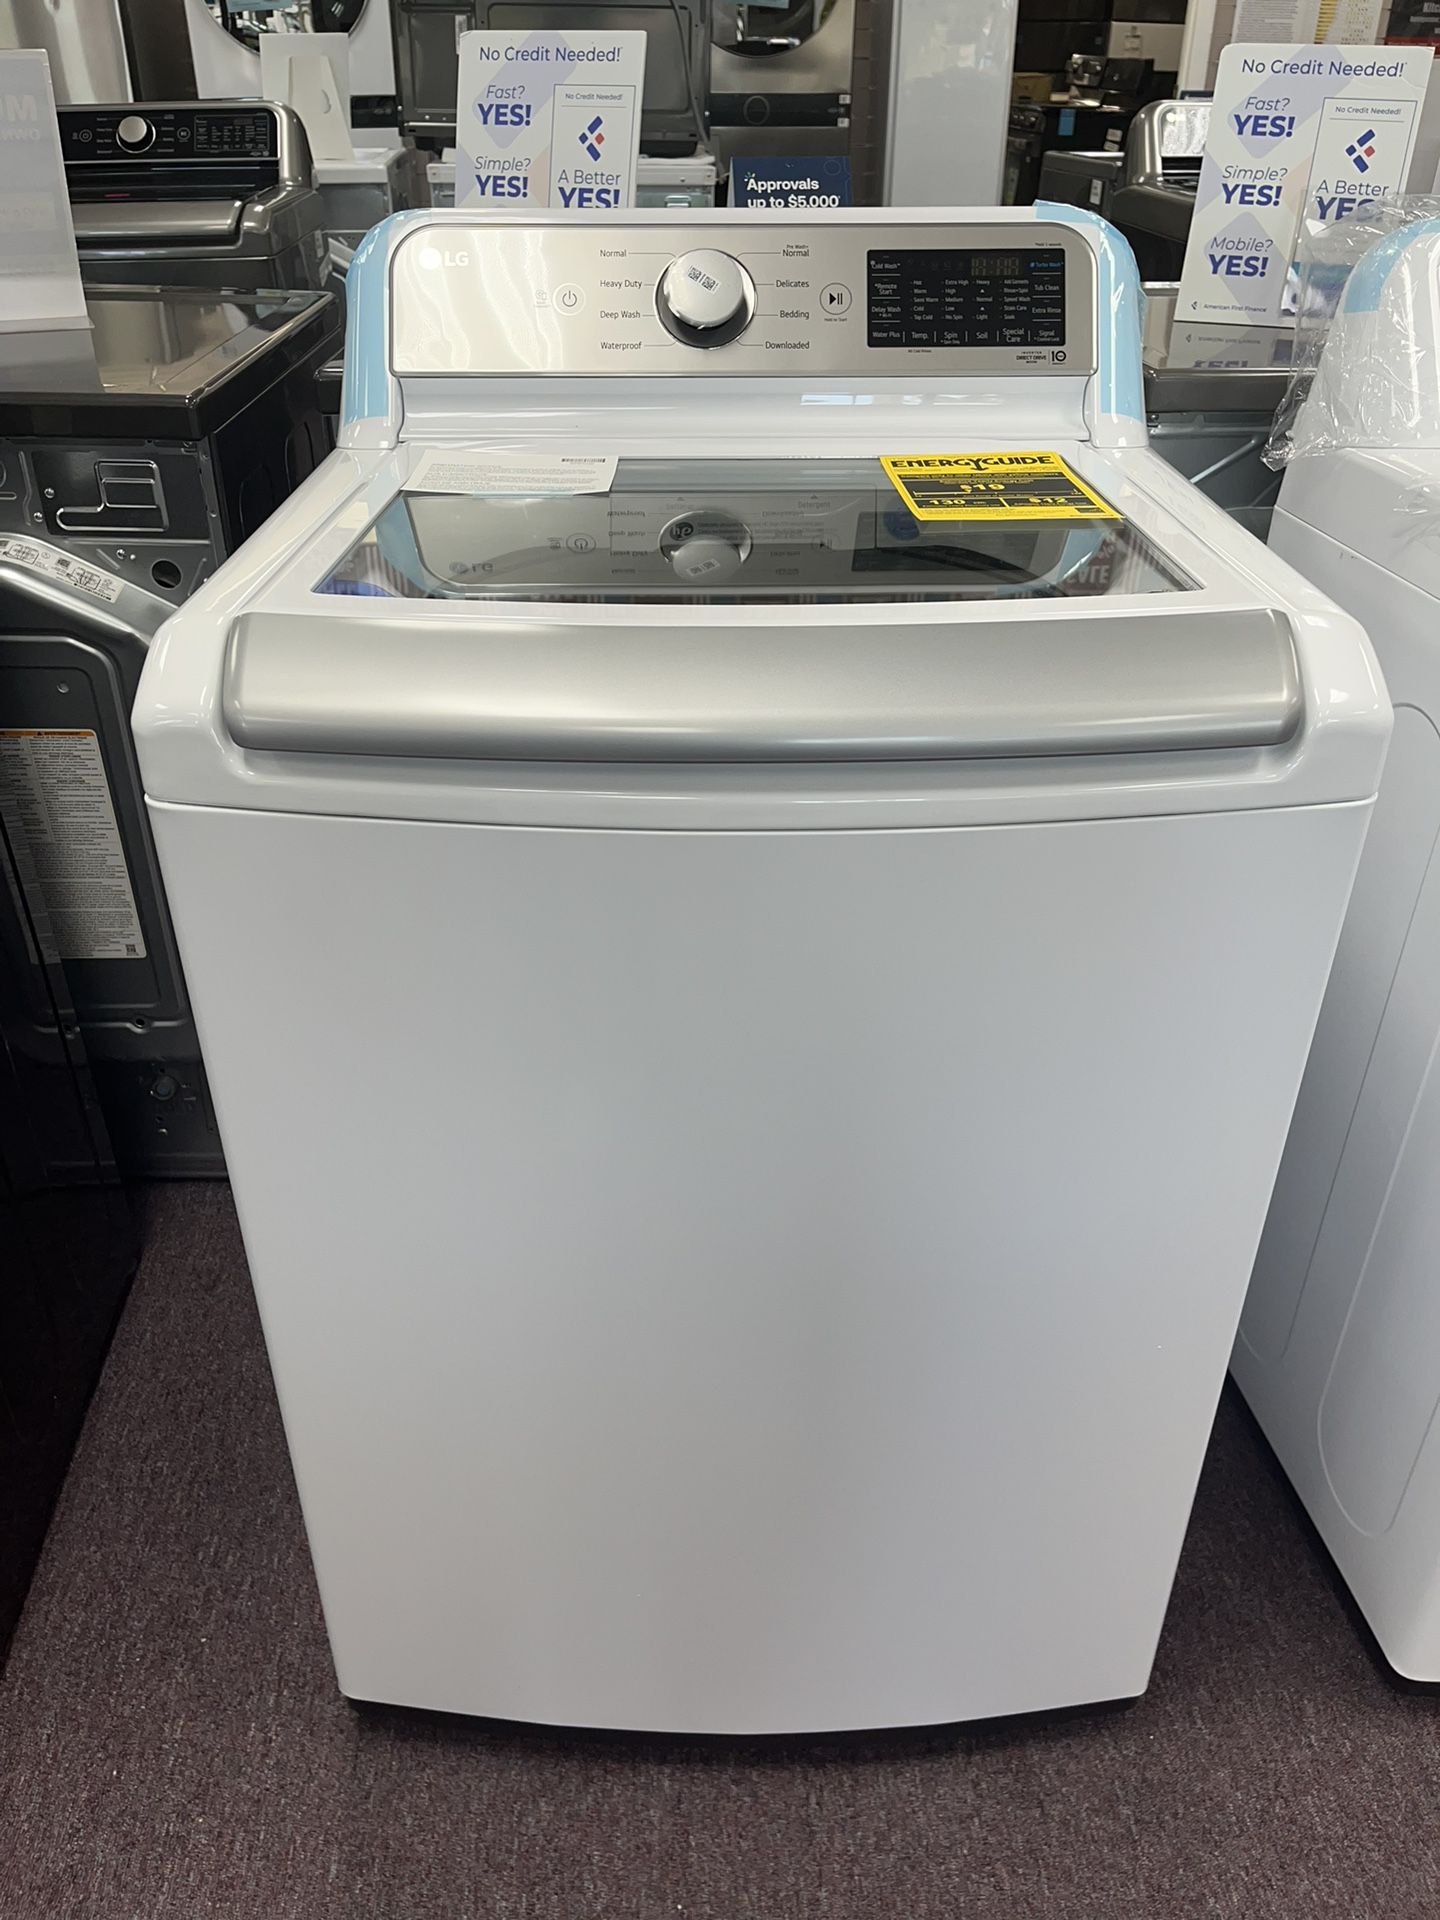 Washer-LG Brand New Top Load Washer With 1 Year Warranty 